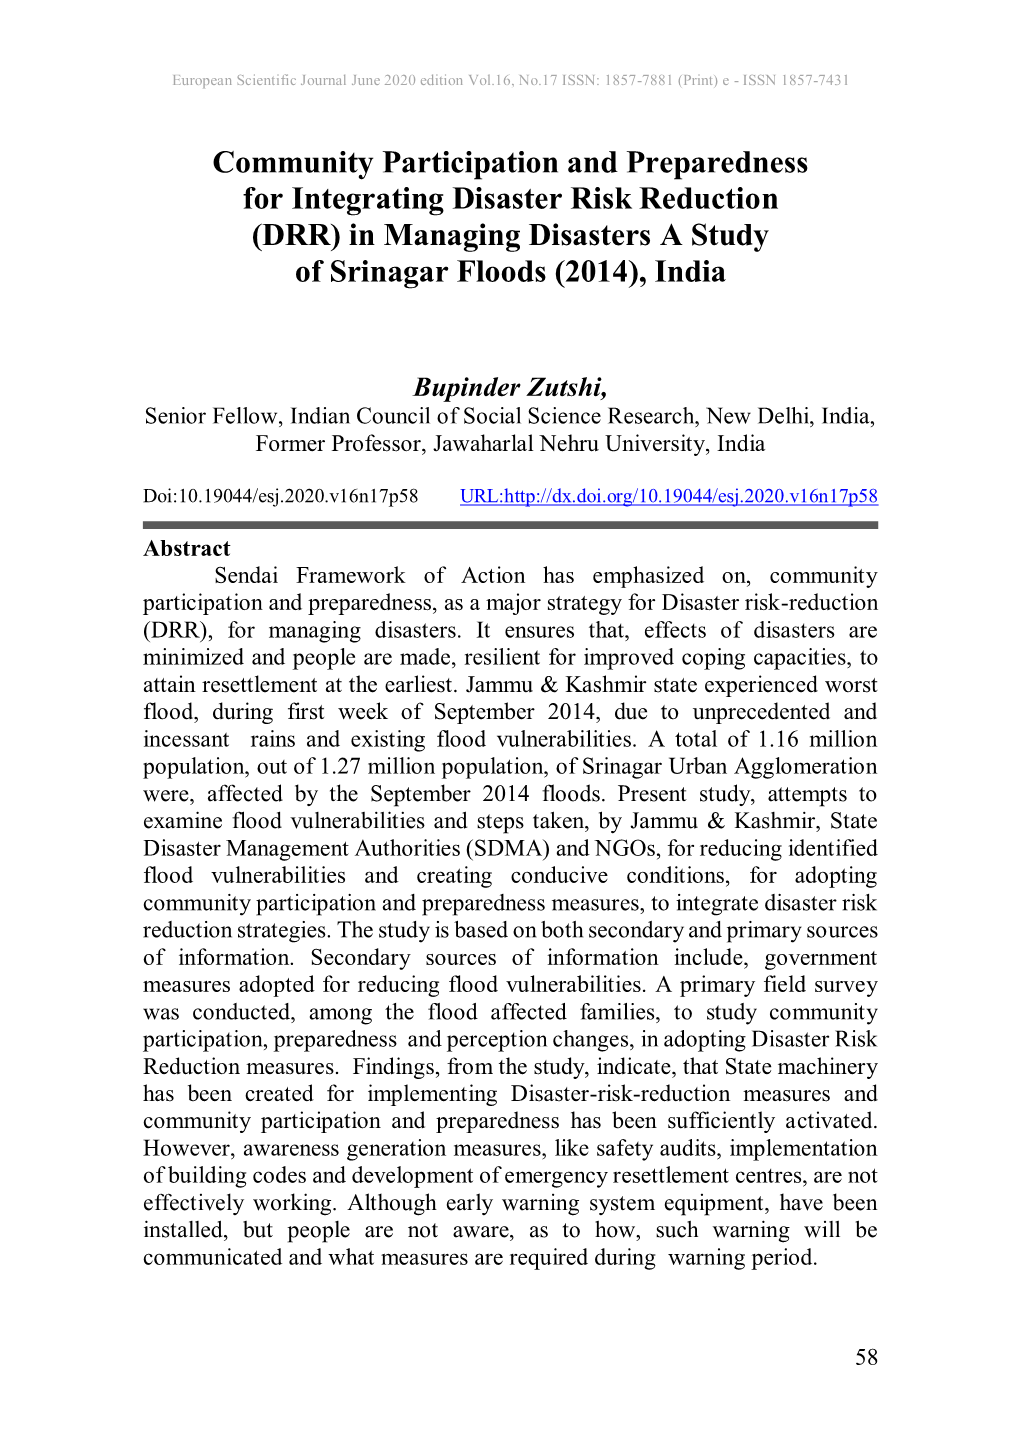 Community Participation and Preparedness for Integrating Disaster Risk Reduction (DRR) in Managing Disasters a Study of Srinagar Floods (2014), India